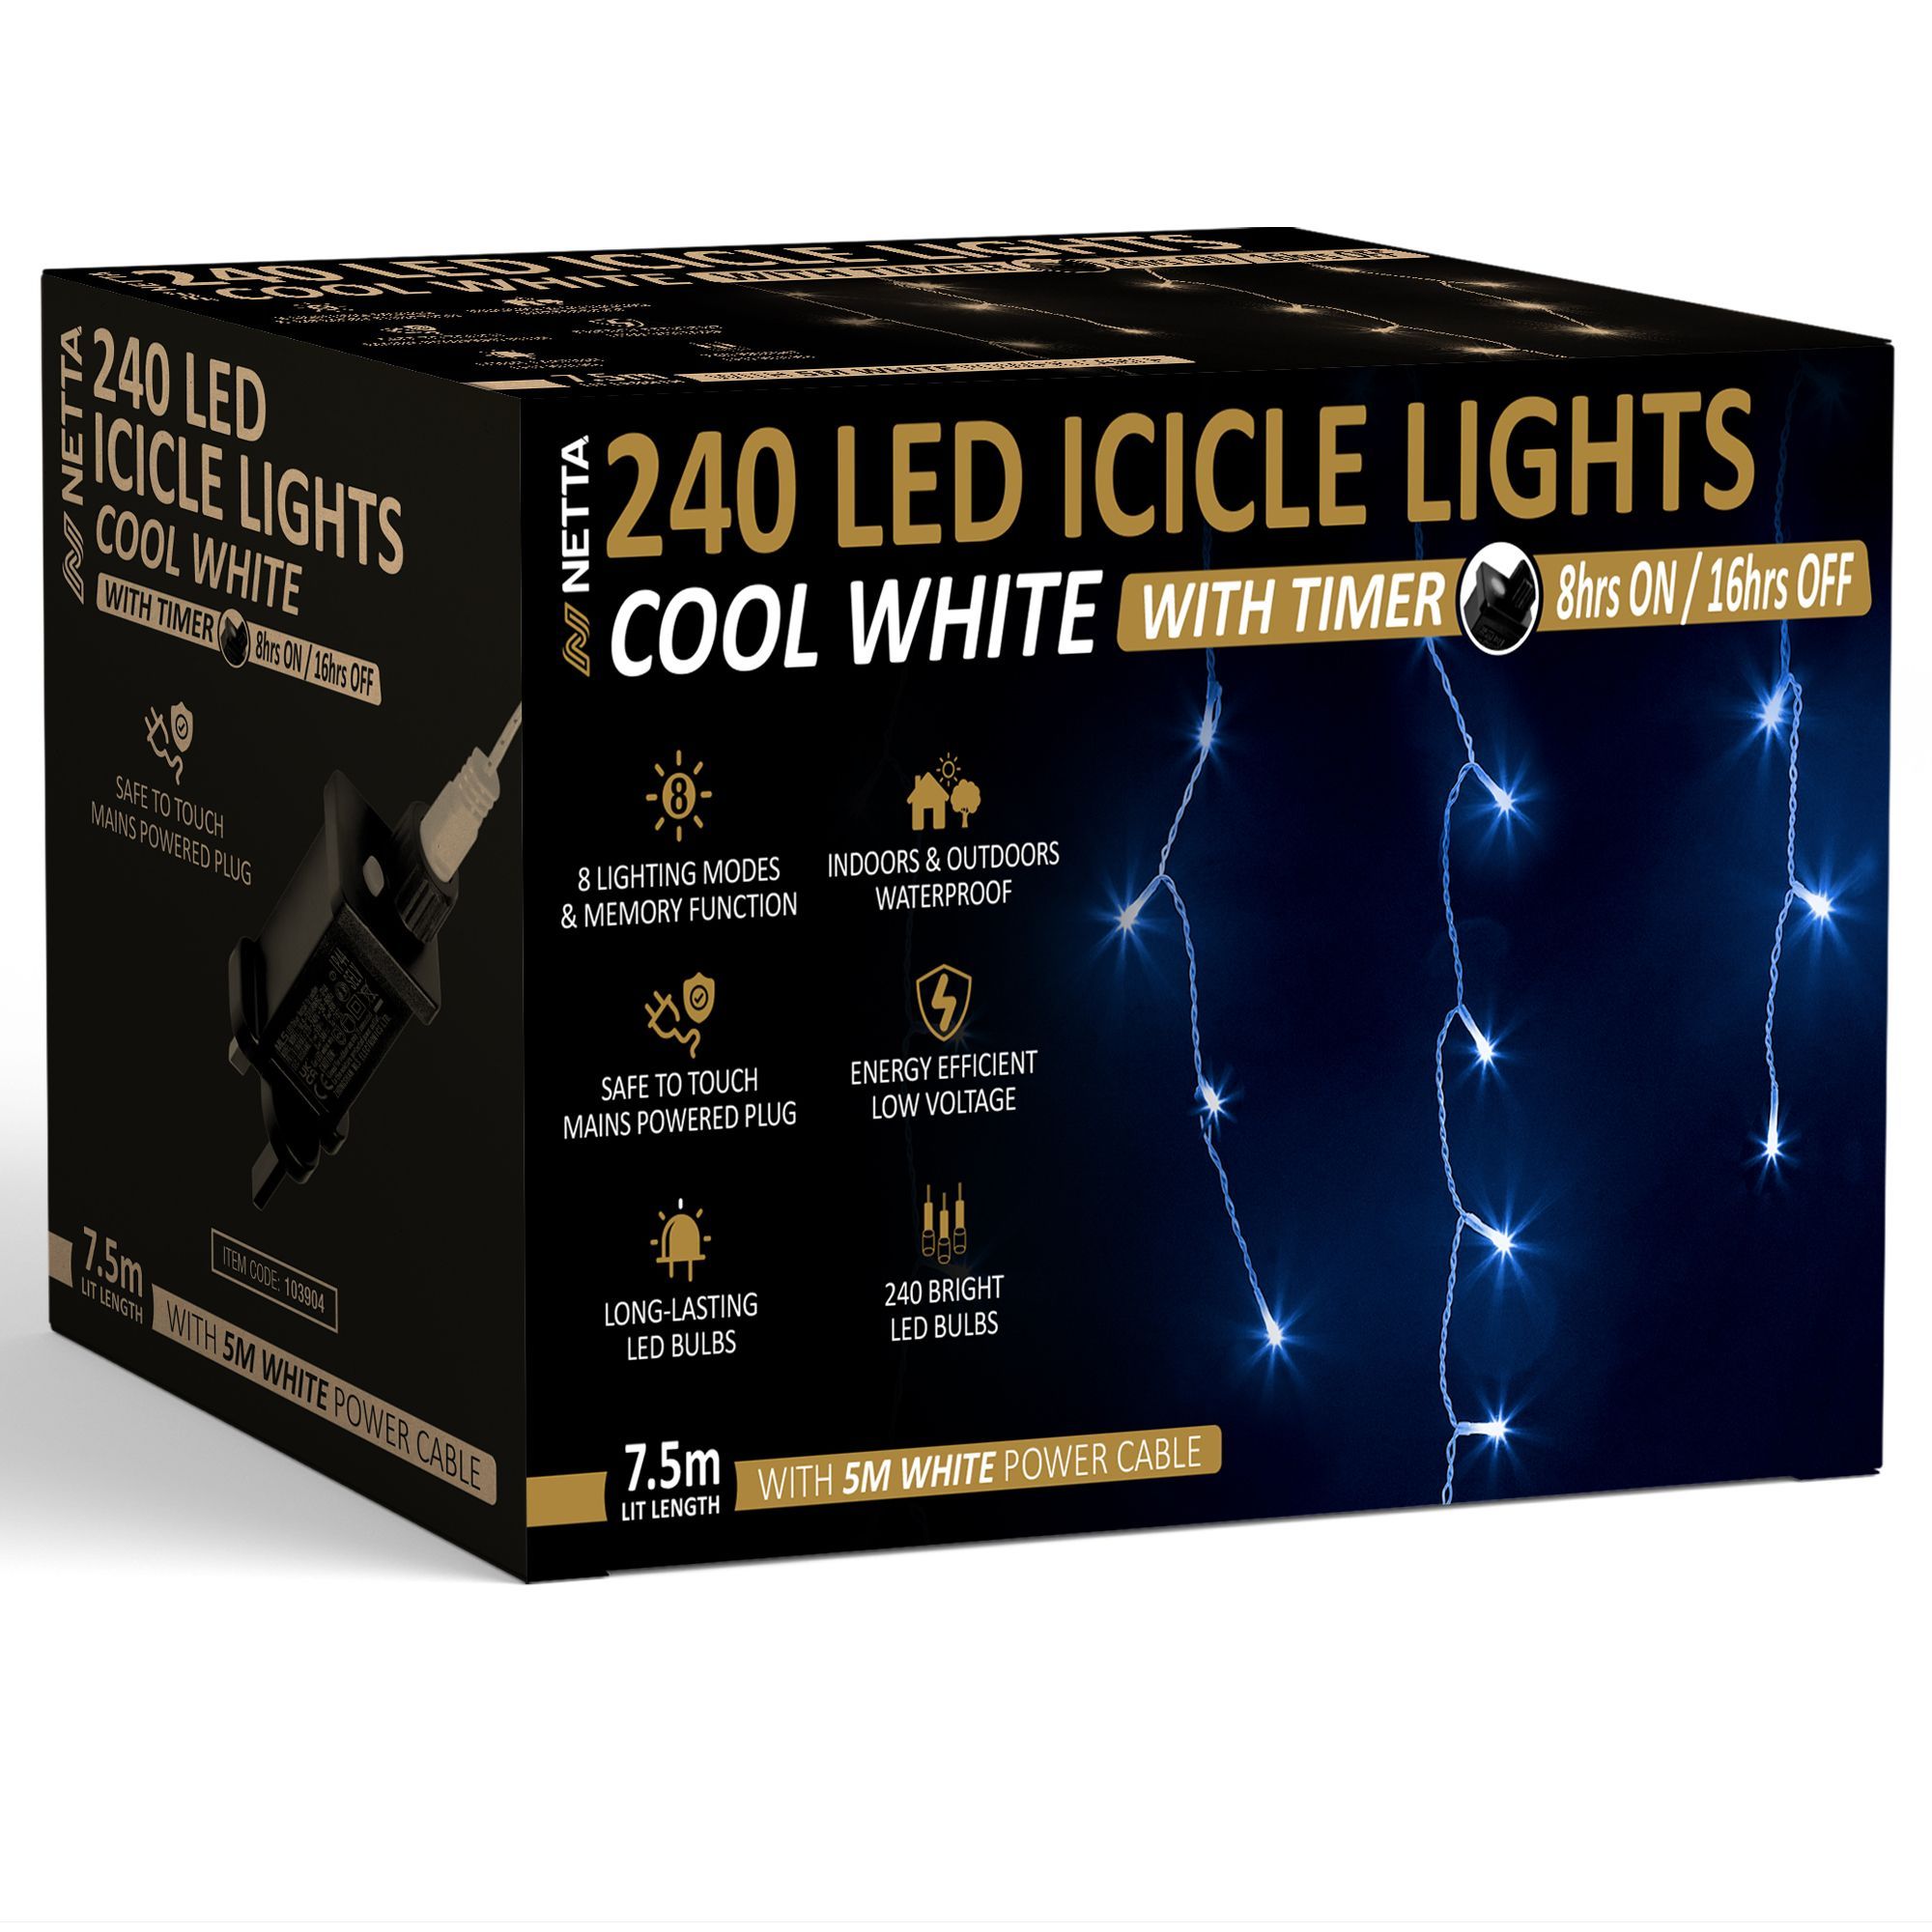 NETTA 240 LED Icicle Lights 7.5M Outdoor Christmas Lights - Cool White, with White Cable